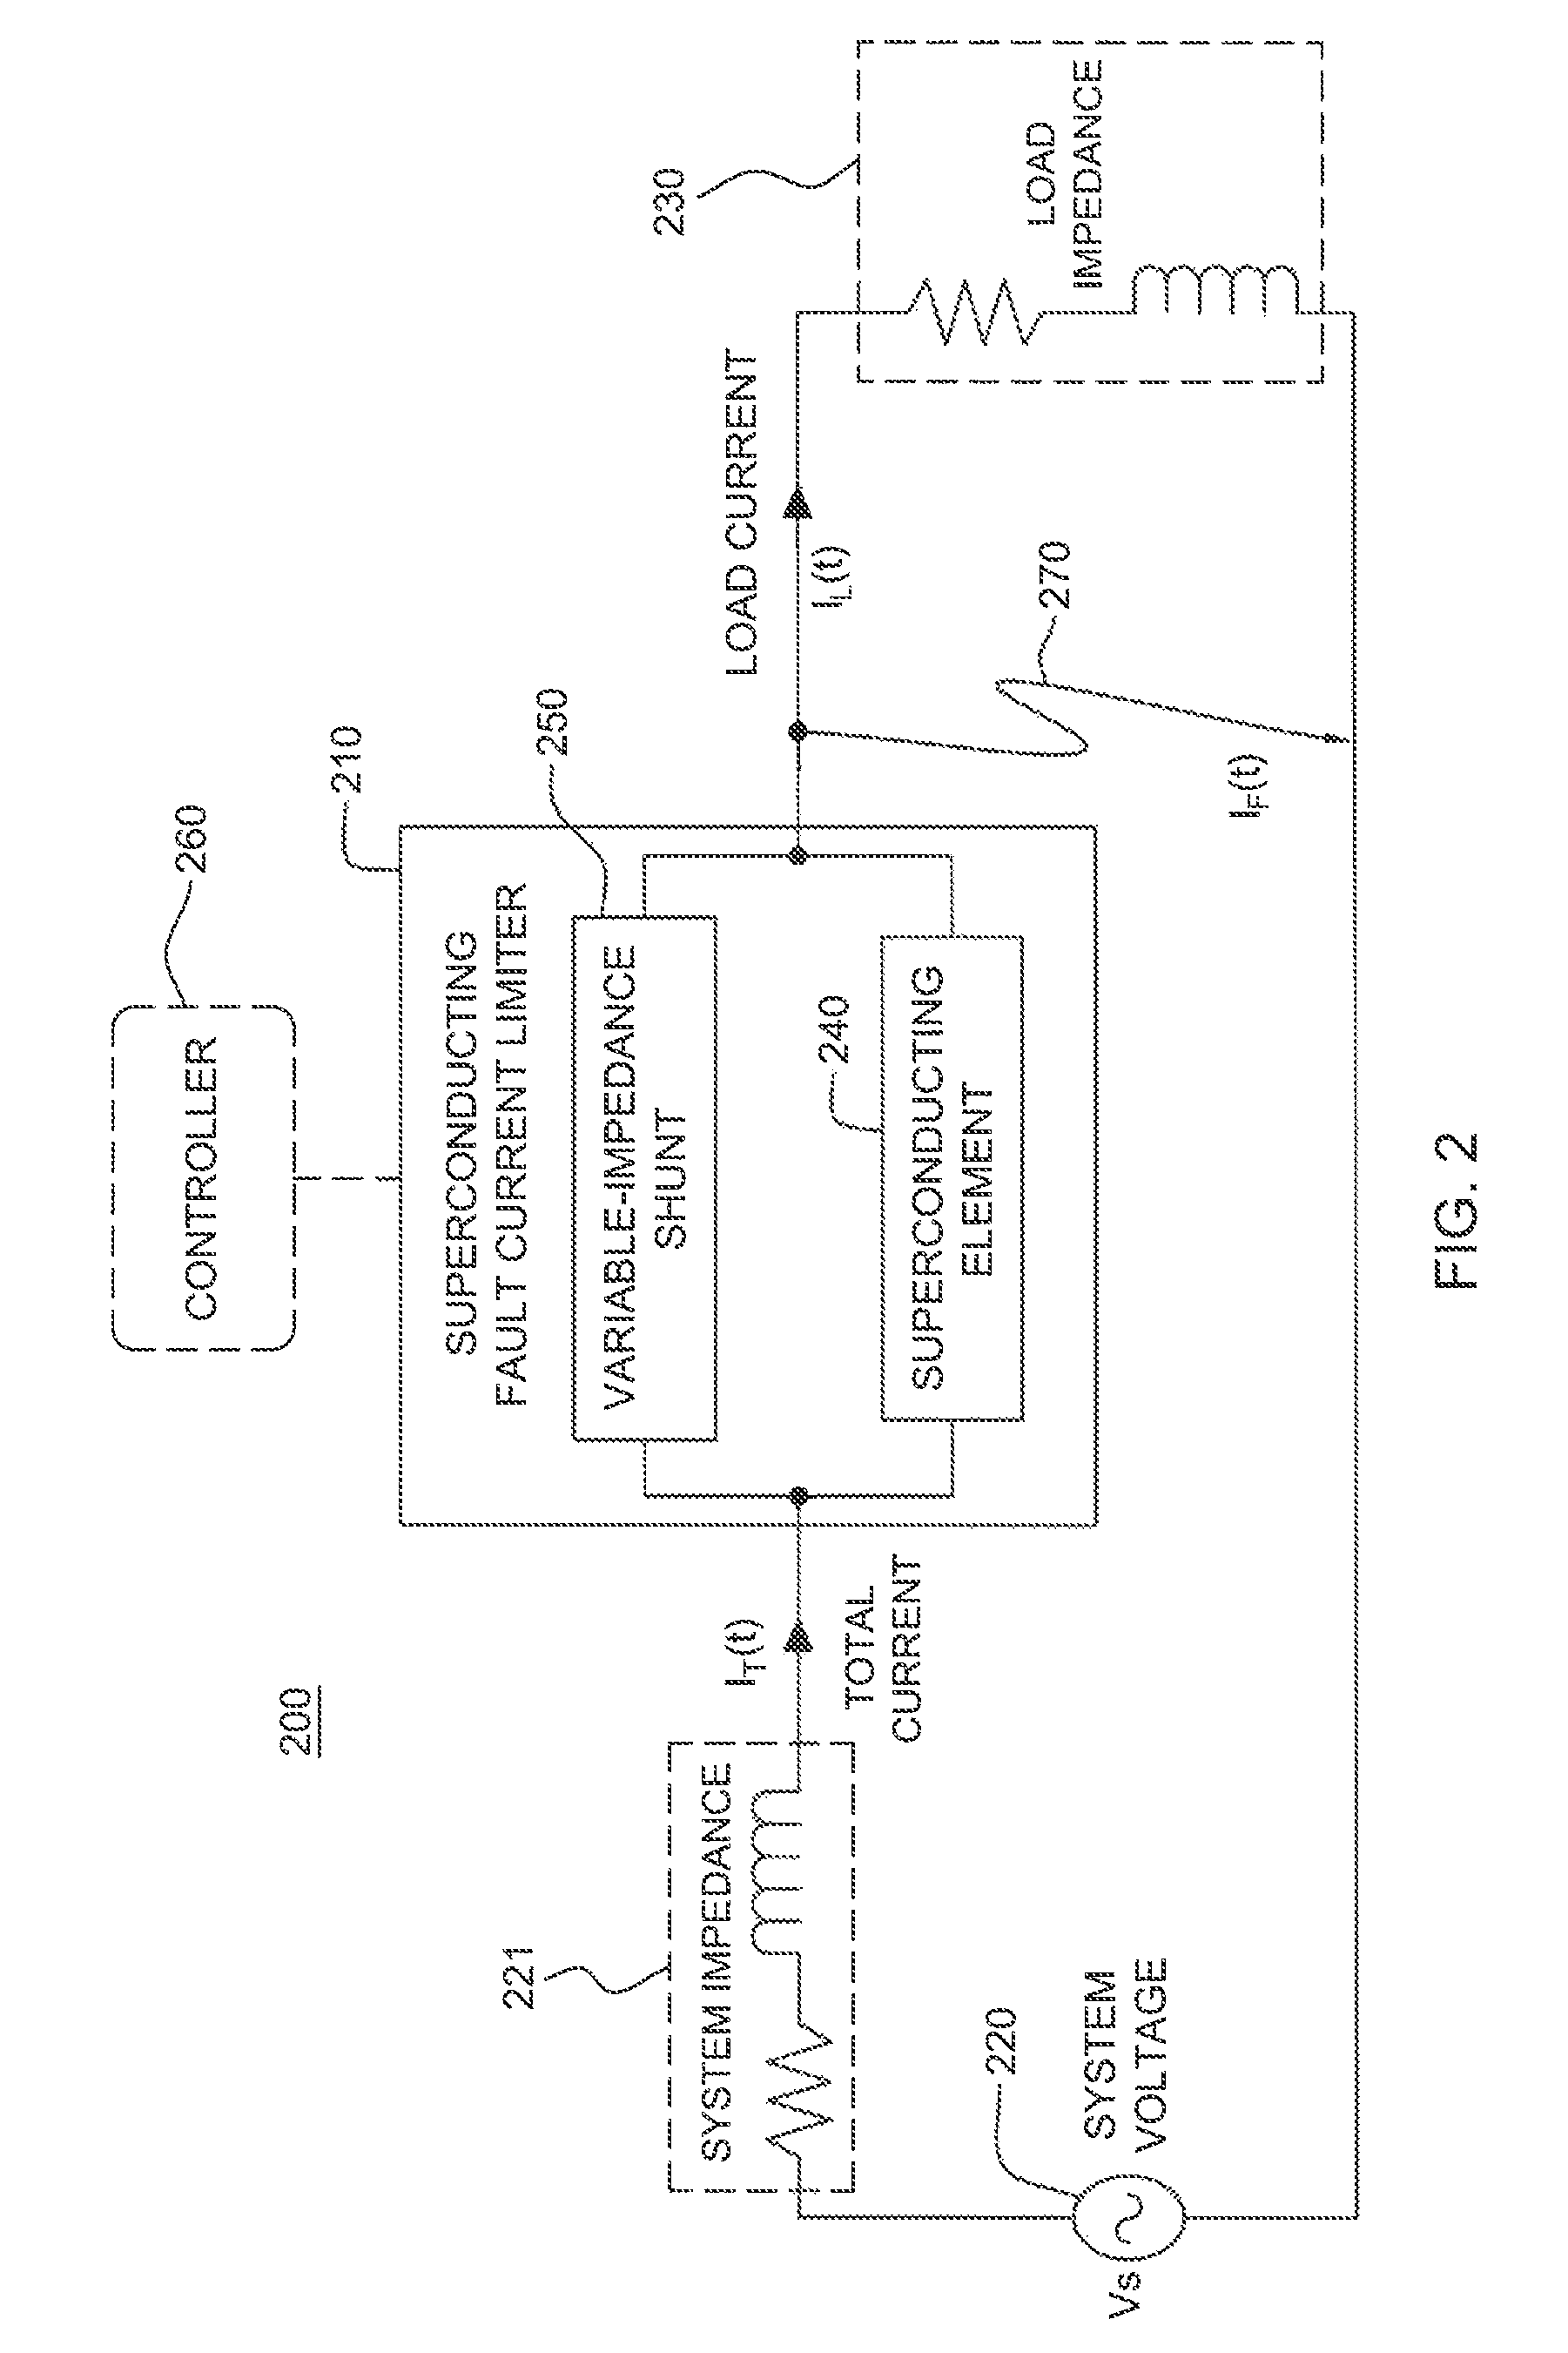 Superconducting fault current-limiter with variable shunt impedance